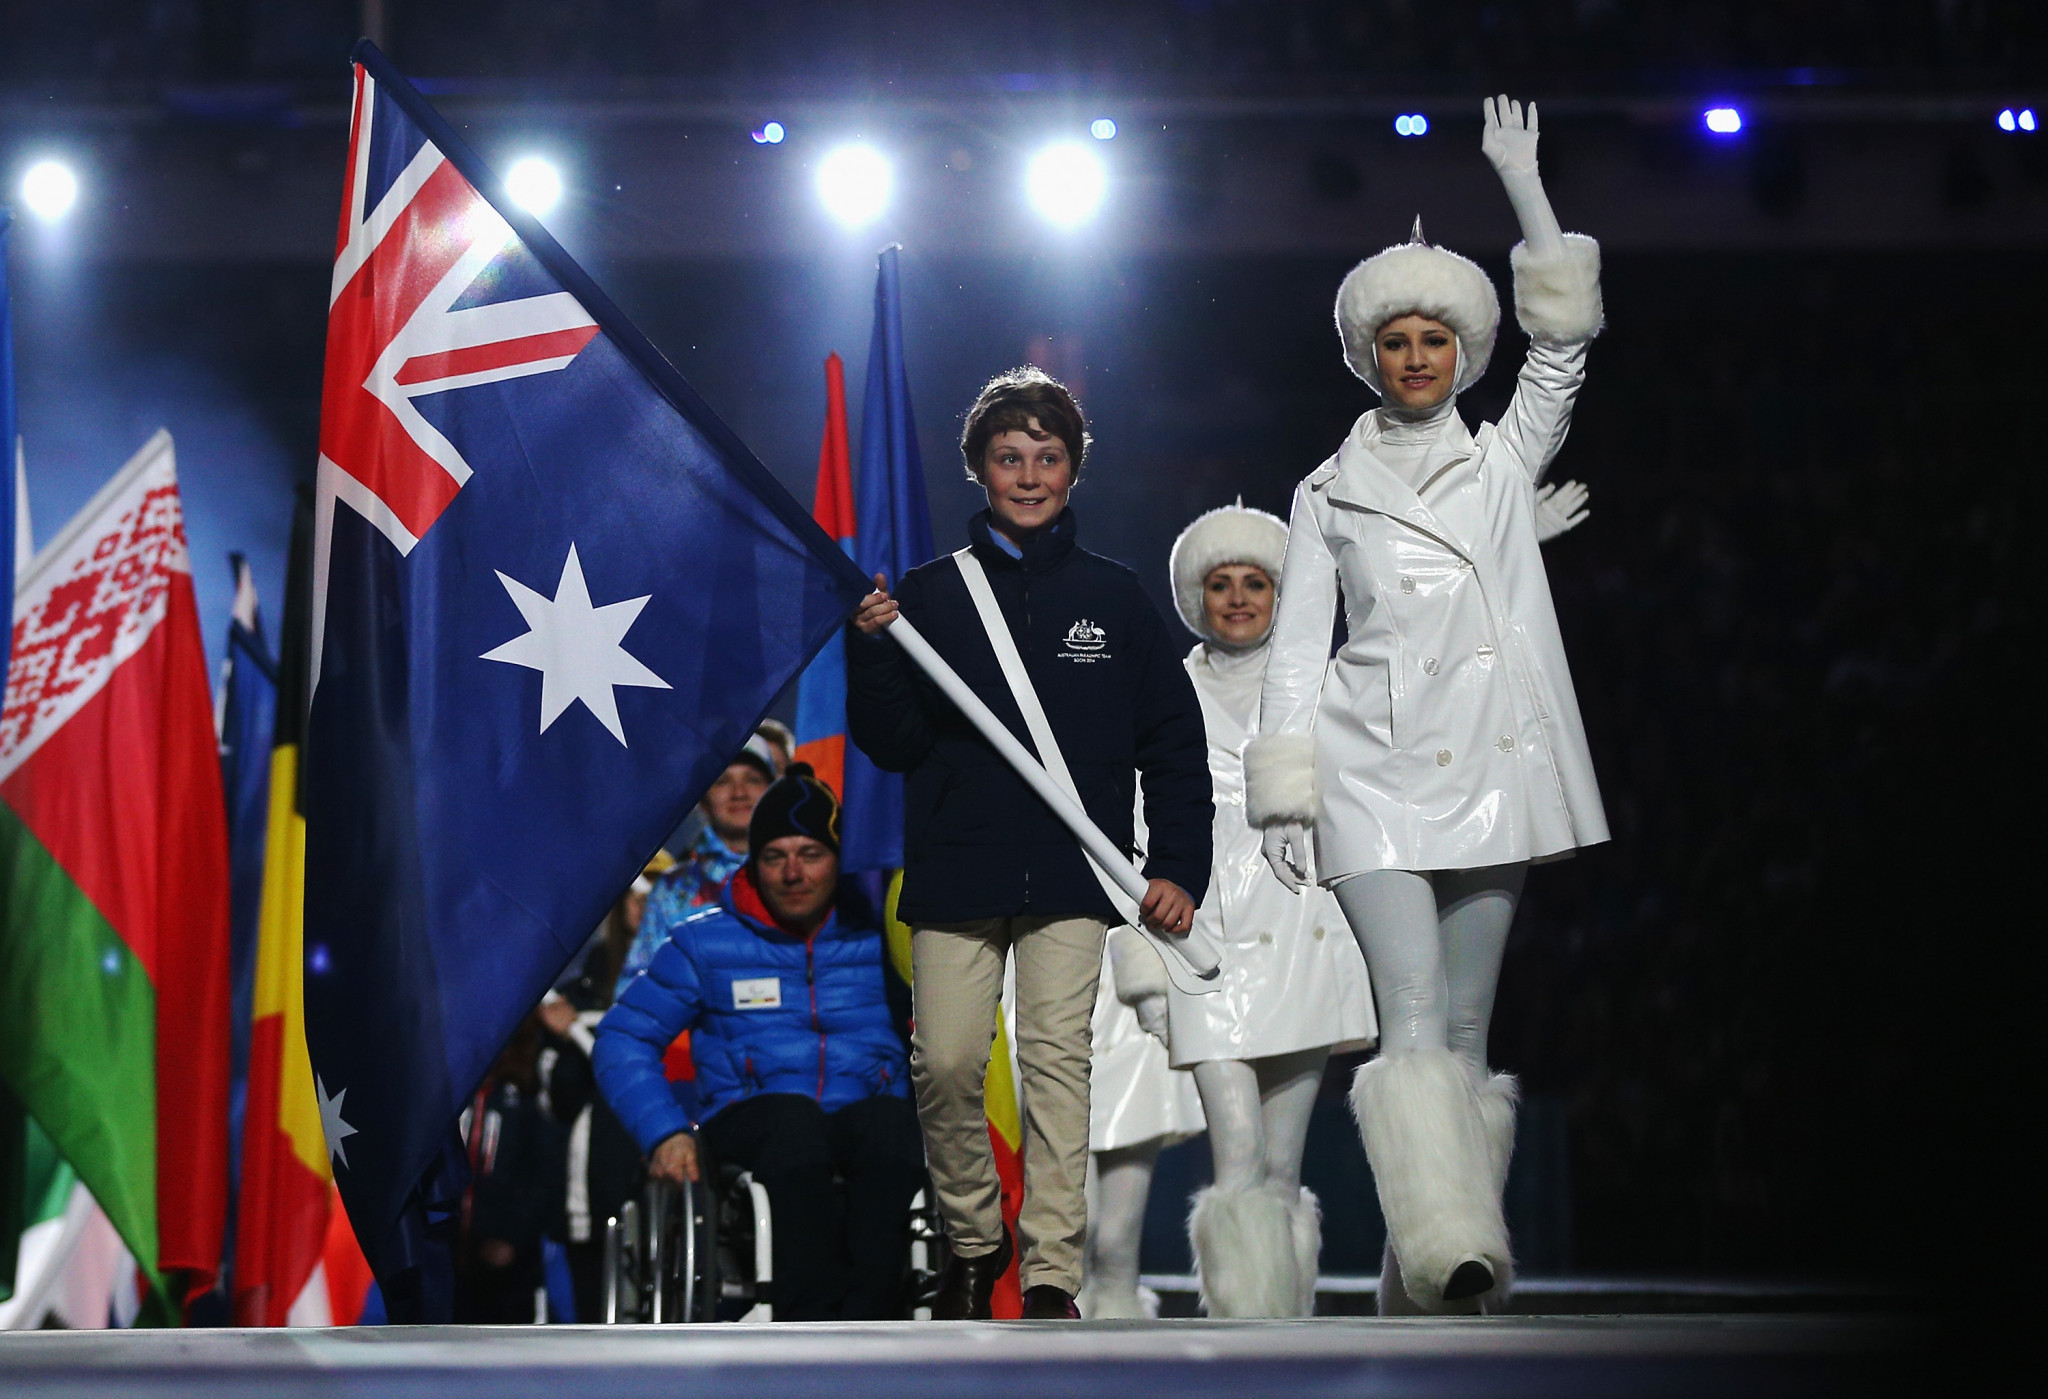 Ben Tudhope carried the Australian flag at the Sochi 2014 Paralympic Games Closing Ceremony ©Getty Images